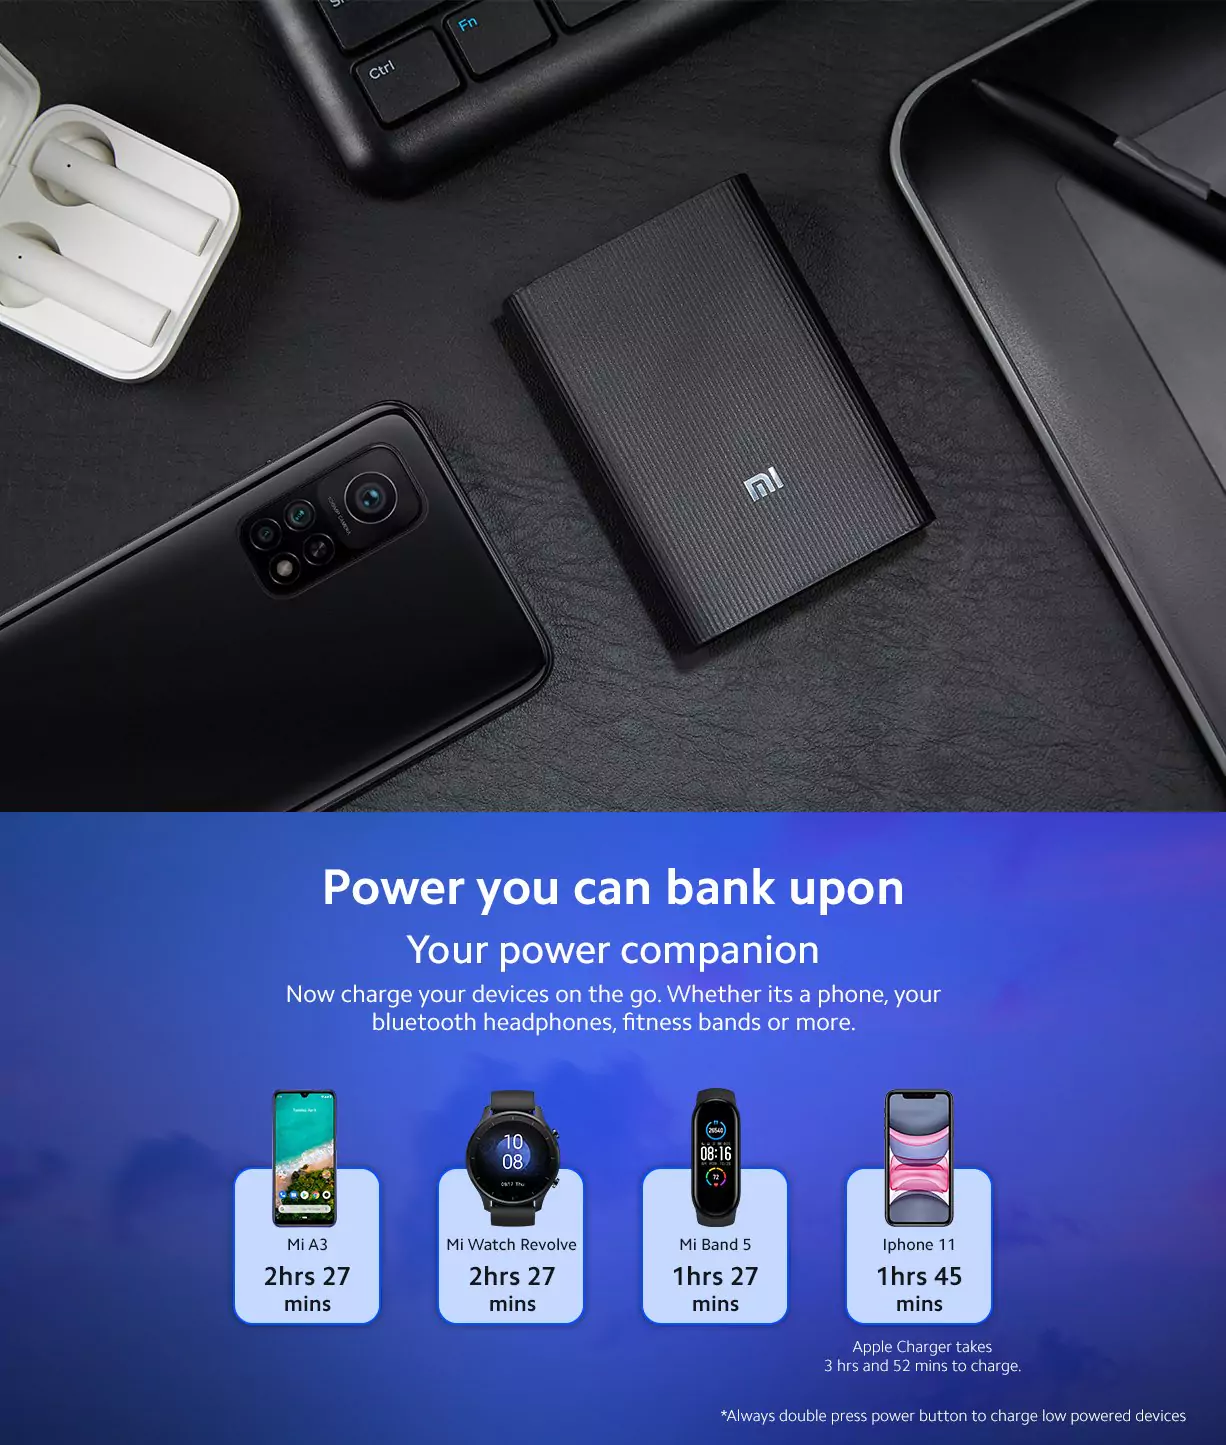 MI 10000mAh Powerbank Pocket Pro black color 22.5 Watt Lithium Ion, Lithium Polymer with Fast Charging, Dual Input Ports (Micro-USB and Type C), Triple Output Ports